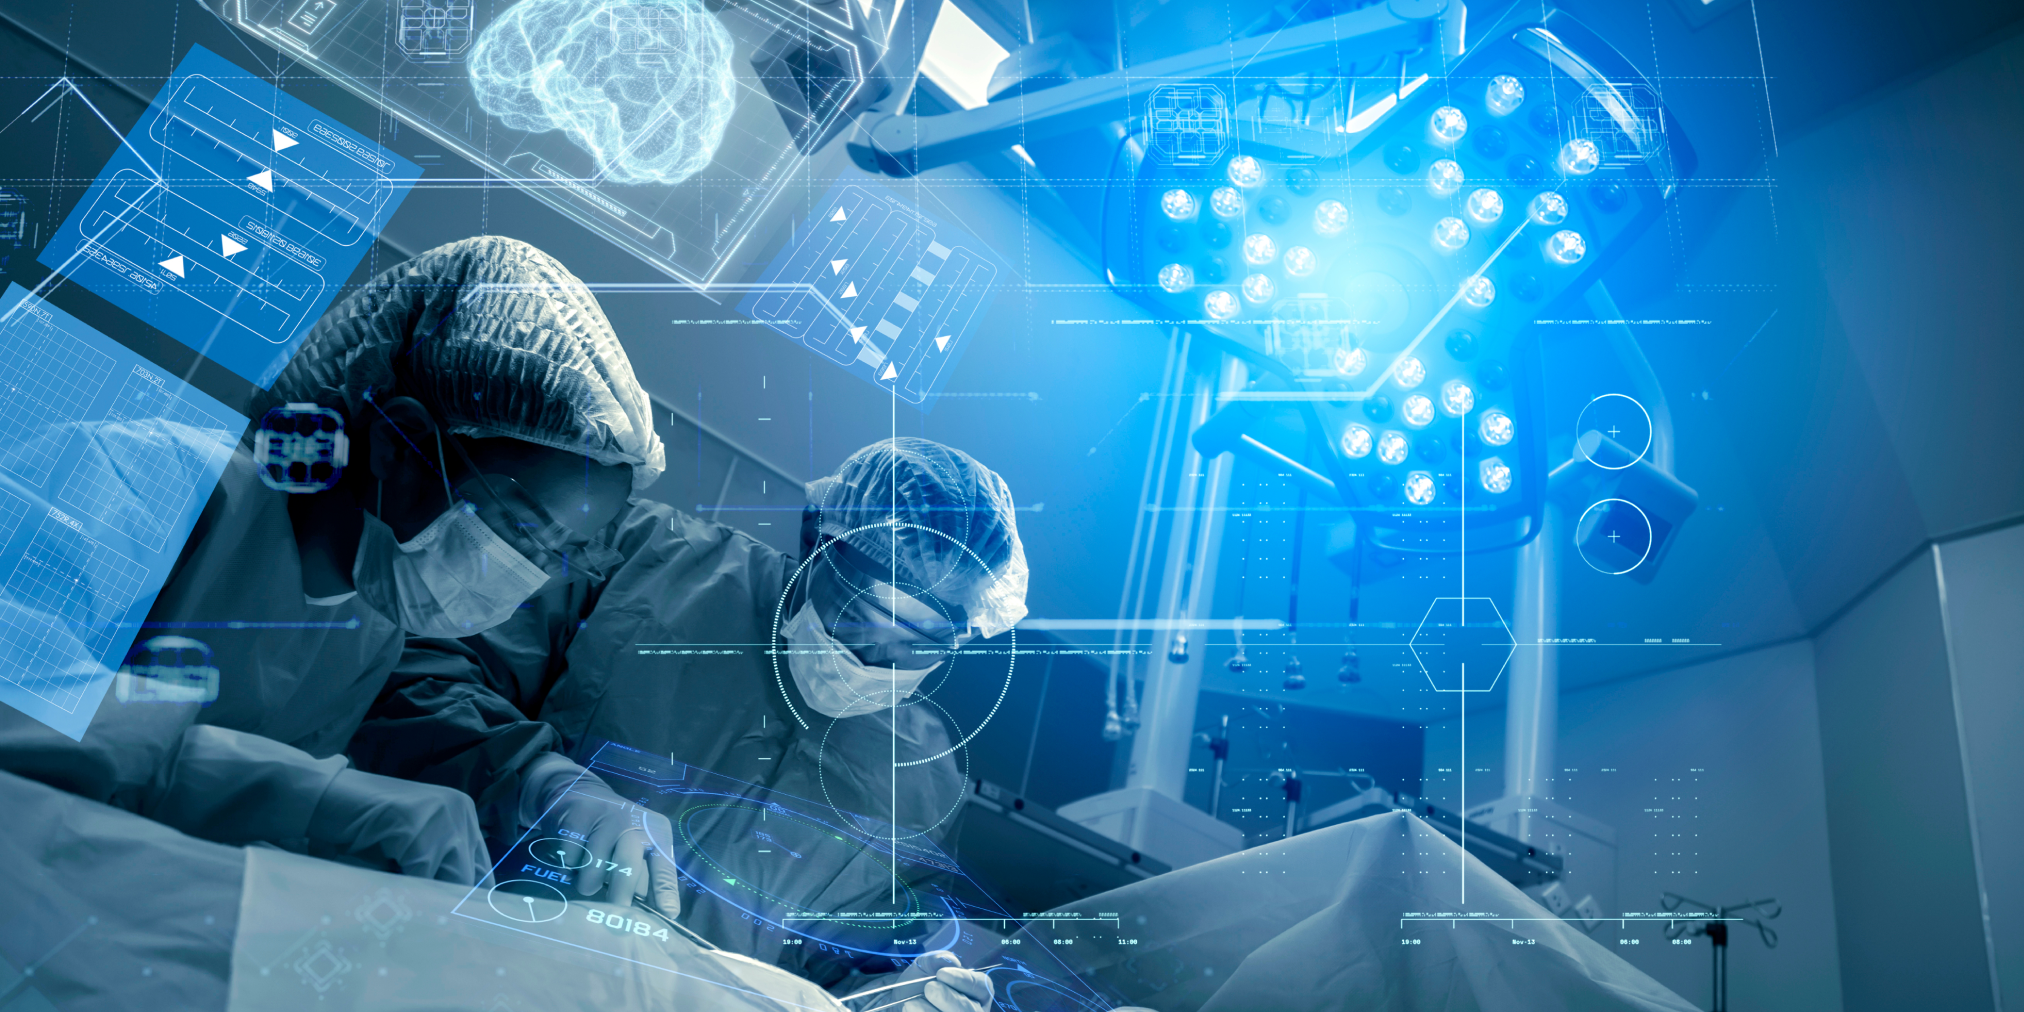 The Future of Surgery: Using AI to Optimize Surgical Patients